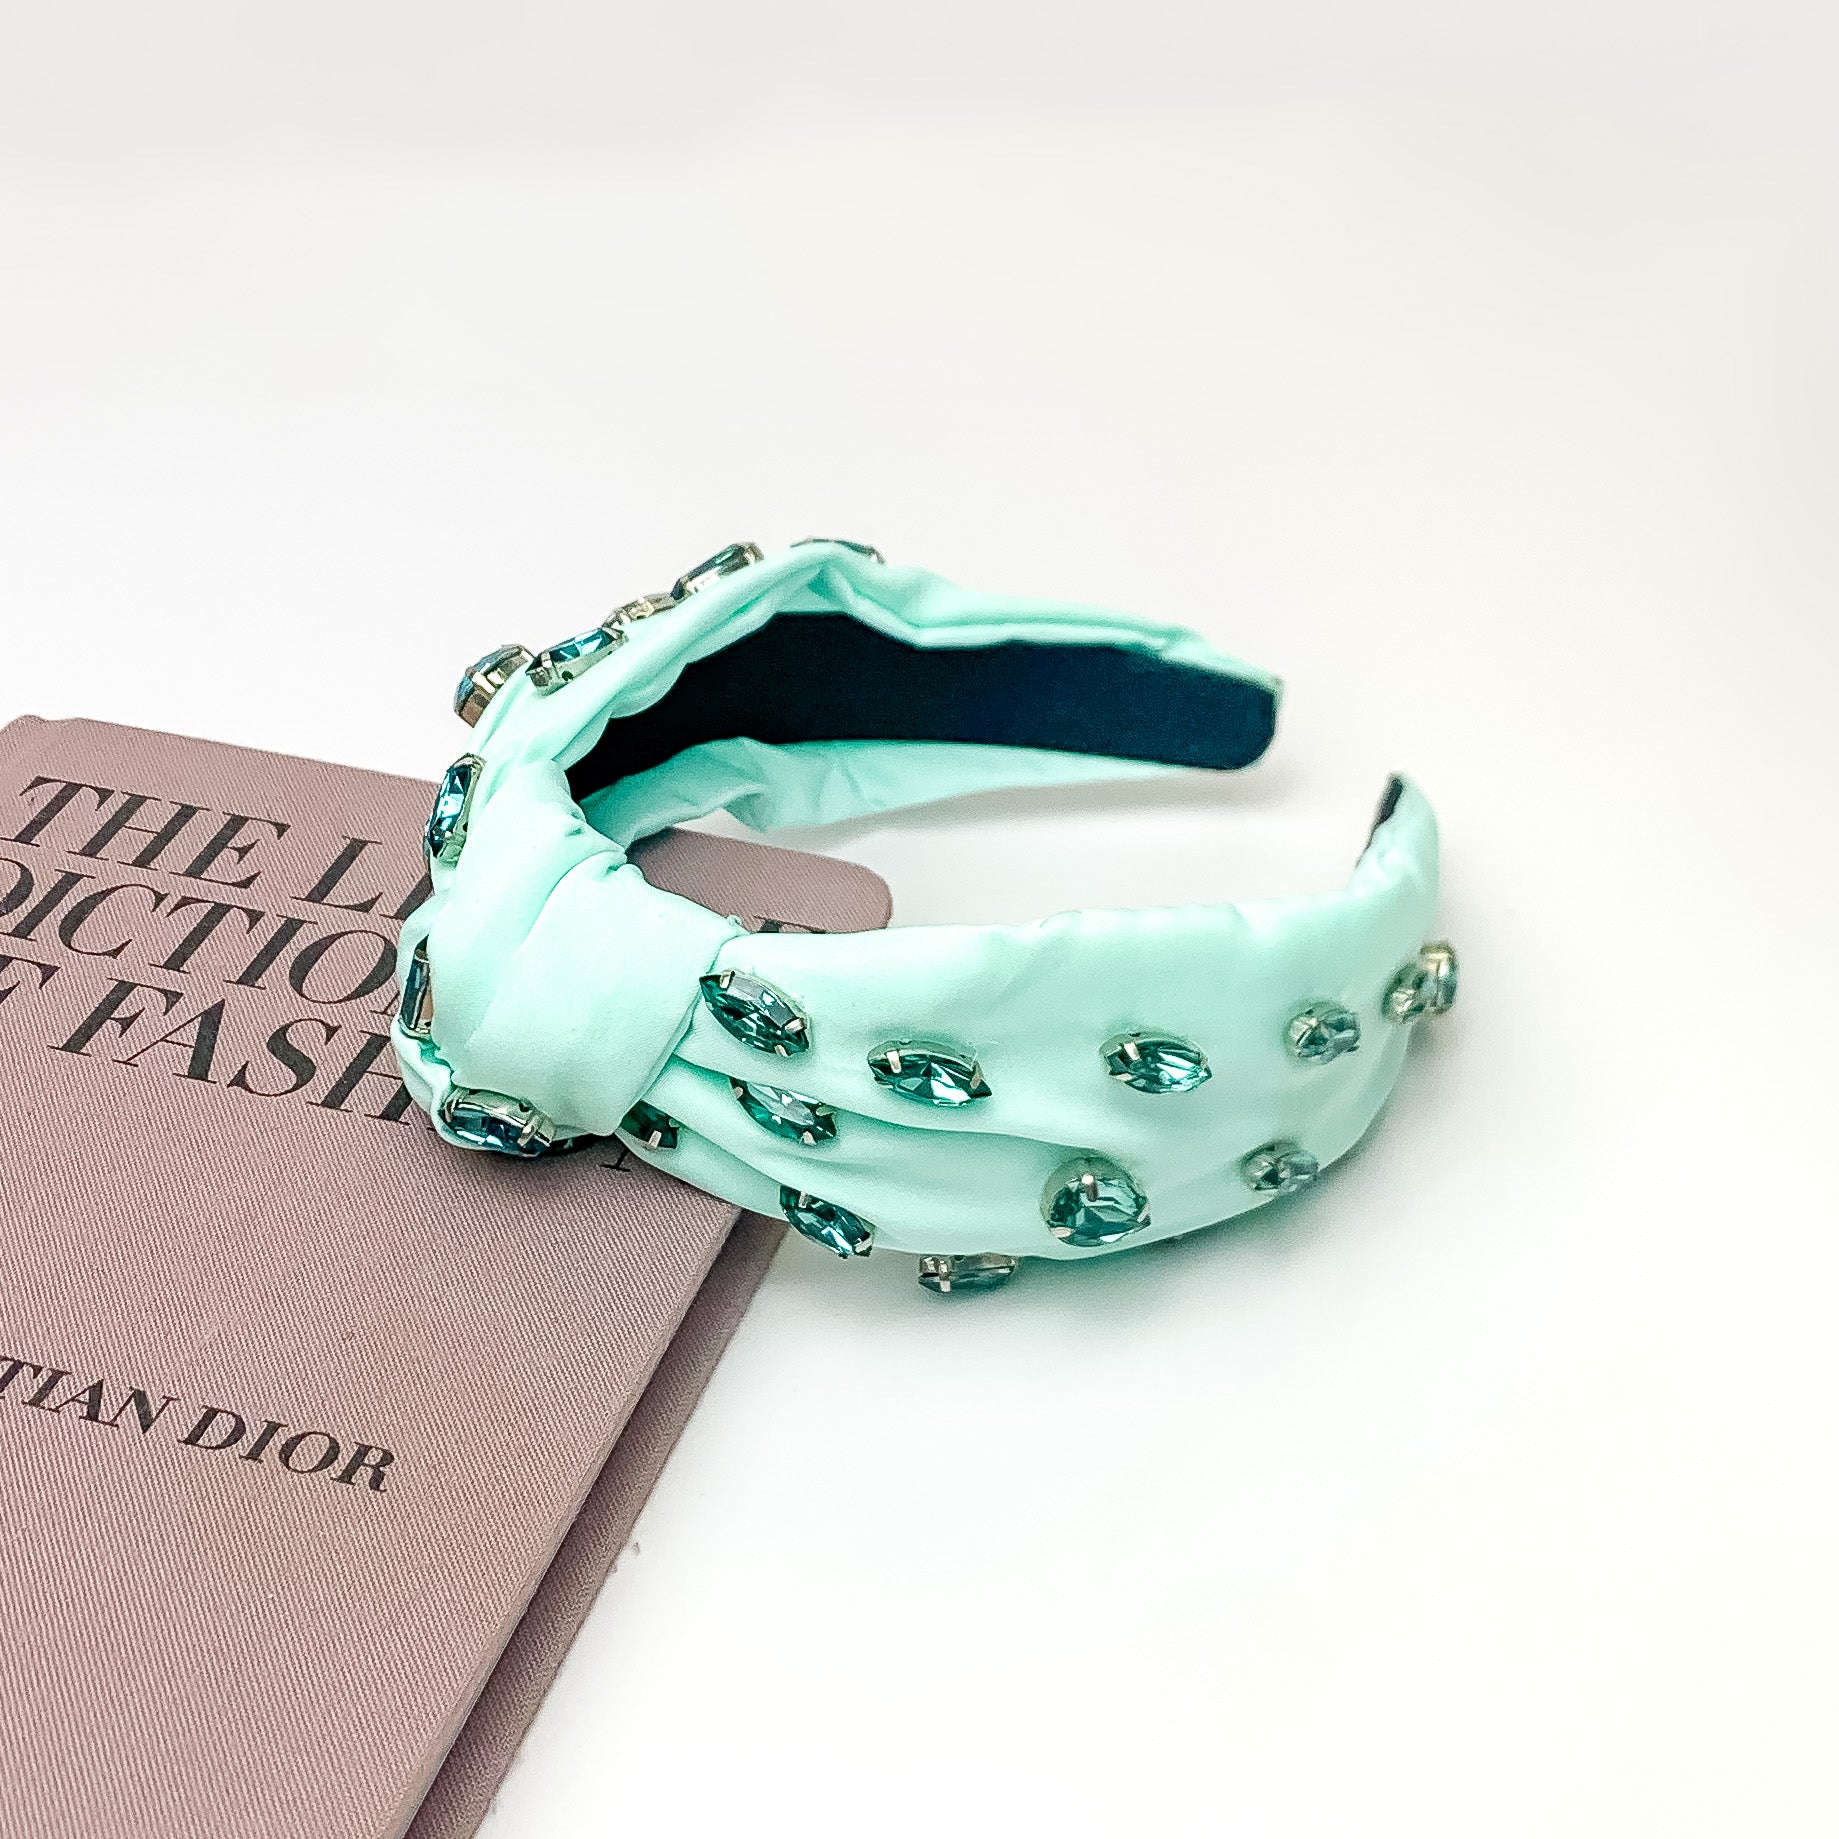 Crystal Detailed Knot Headband in Mint Green. Pictured on a white background with the headband laying against a pink book. 